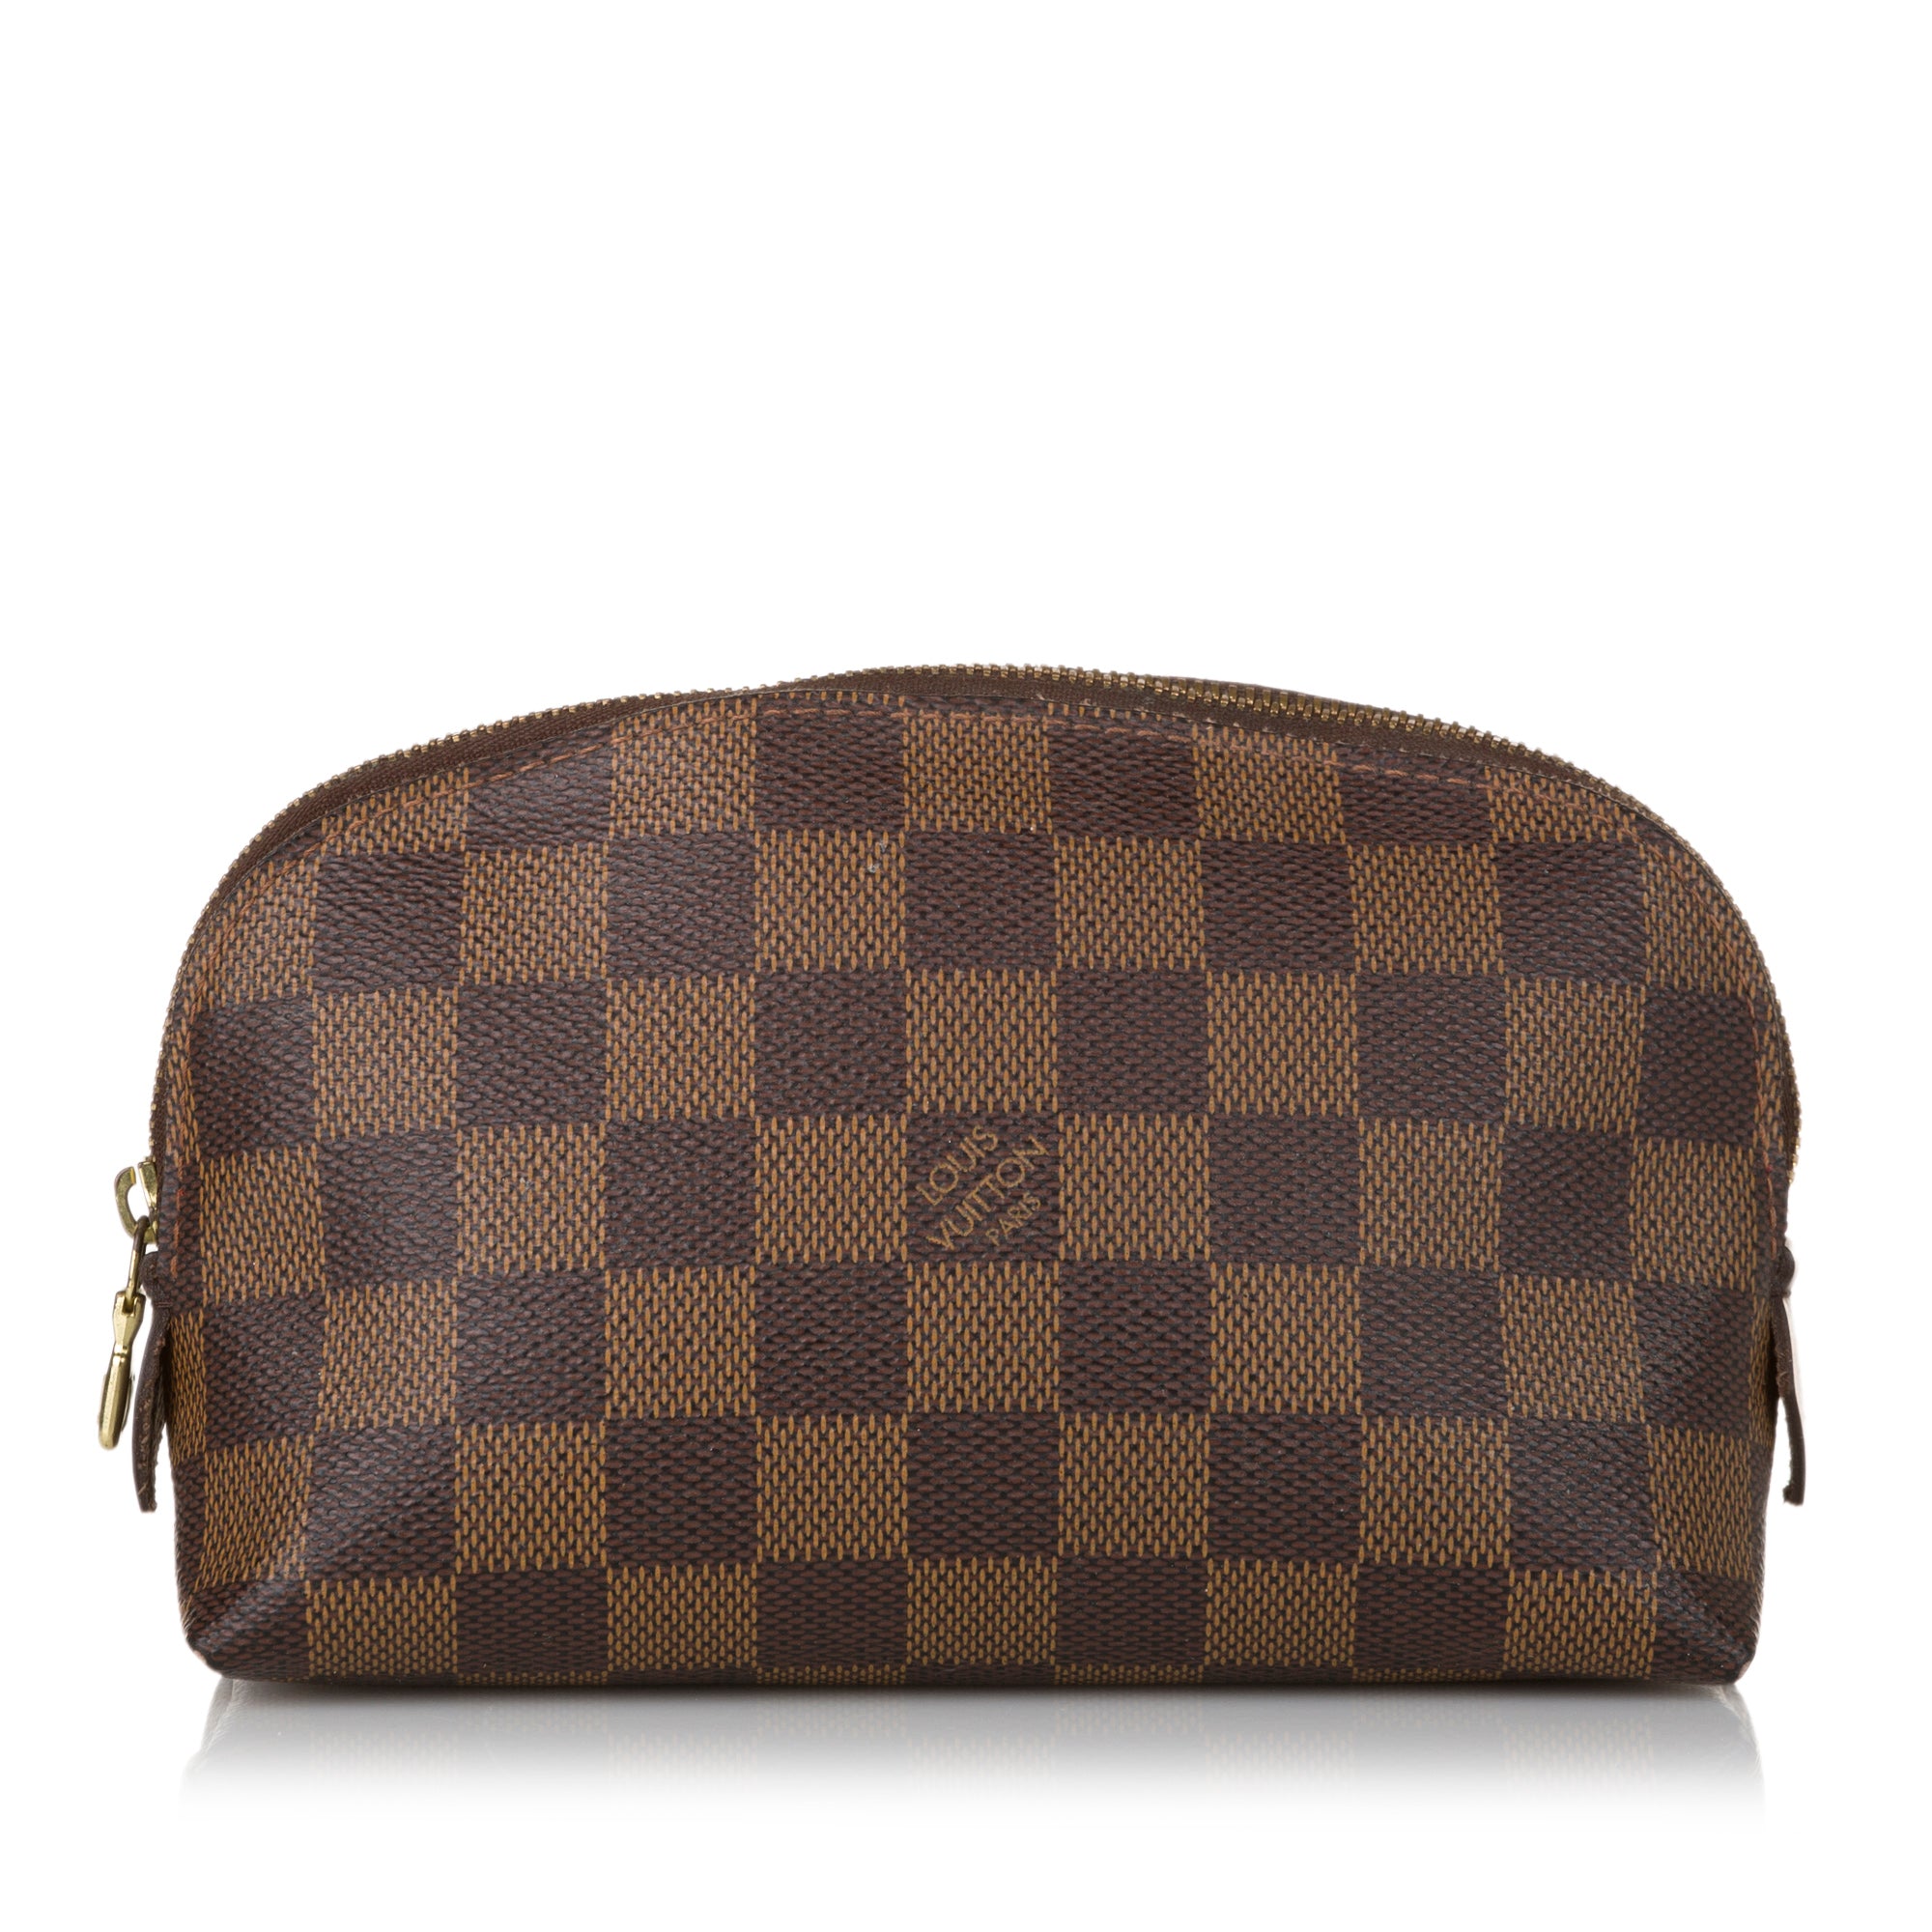 WpadcShops - 005 - check out the details on these louis vuitton x